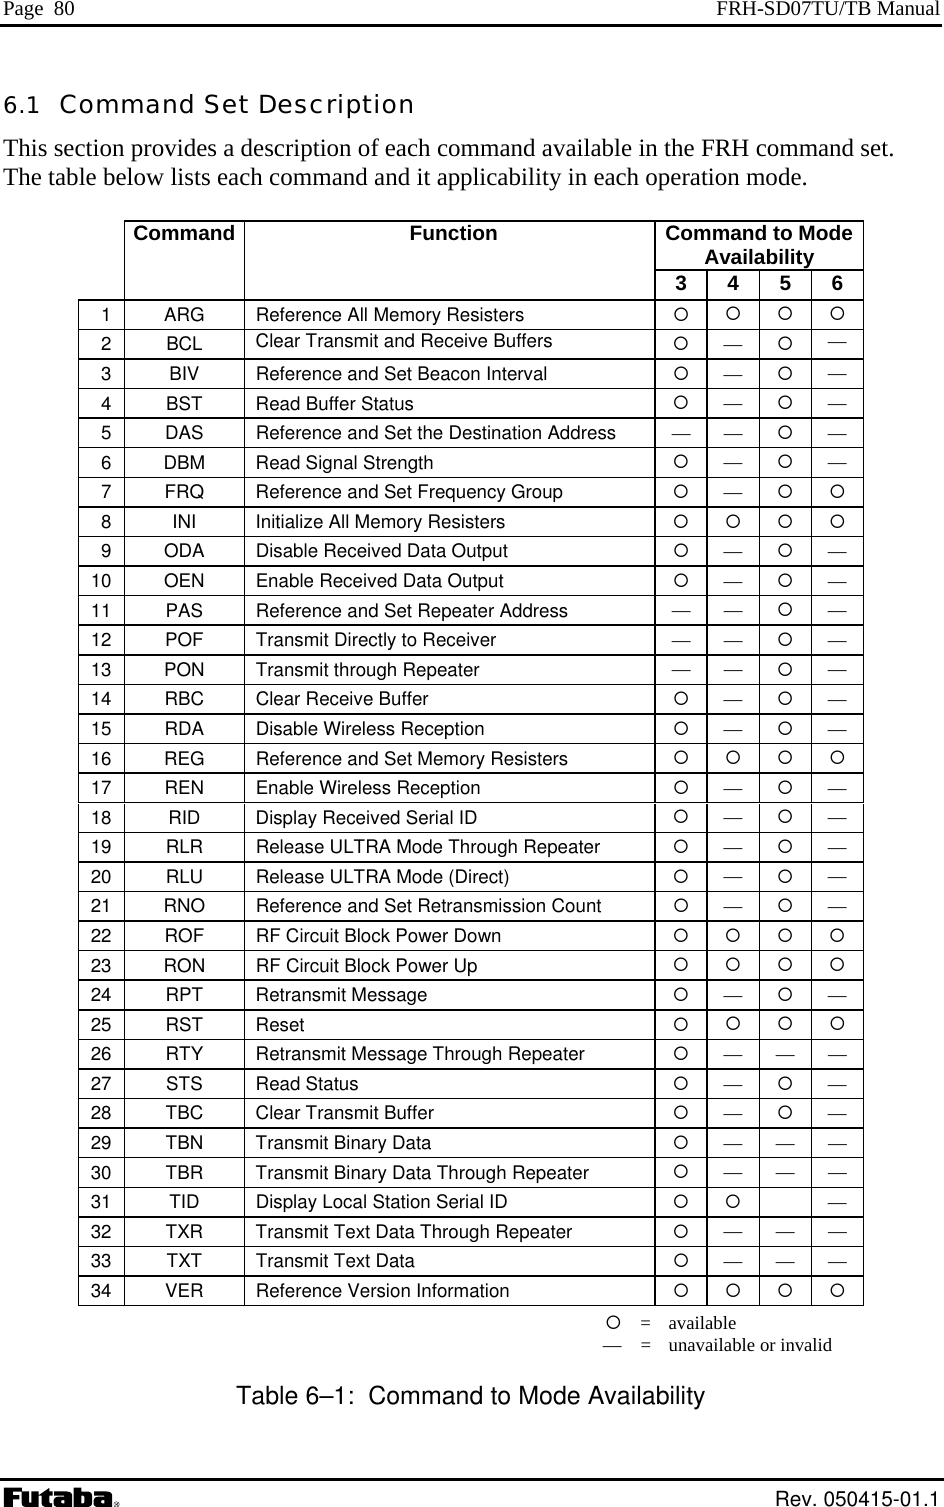 Page  80  FRH-SD07TU/TB Manual 6.1  Command Set Description This section provides a description of each command available in the FRH command set. The table below lists each command and it applicability in each operation mode.    Command    Function  Command to Mode Availability       3 4 5 6 1   ARG  Reference All Memory Resisters      2   BCL  Clear Transmit and Receive Buffers   —  — 3   BIV  Reference and Set Beacon Interval   —  — 4   BST  Read Buffer Status   —  — 5   DAS  Reference and Set the Destination Address  —— — 6   DBM  Read Signal Strength   —  — 7   FRQ  Reference and Set Frequency Group   —   8   INI  Initialize All Memory Resisters      9   ODA  Disable Received Data Output   —  — 10   OEN  Enable Received Data Output   —  — 11   PAS   Reference and Set Repeater Address  —— — 12   POF   Transmit Directly to Receiver  —— — 13   PON   Transmit through Repeater  —— — 14   RBC  Clear Receive Buffer   —  — 15   RDA  Disable Wireless Reception   —  — 16   REG  Reference and Set Memory Resisters      17   REN  Enable Wireless Reception   —  — 18   RID  Display Received Serial ID   —  — 19    RLR   Release ULTRA Mode Through Repeater  — — 20    RLU   Release ULTRA Mode (Direct)  — — 21   RNO  Reference and Set Retransmission Count   —  — 22    ROF   RF Circuit Block Power Down      23    RON   RF Circuit Block Power Up      24   RPT  Retransmit Message   —  — 25   RST  Reset      26   RTY  Retransmit Message Through Repeater   — — — 27   STS  Read Status   —  — 28   TBC  Clear Transmit Buffer   —  — 29   TBN  Transmit Binary Data   — — — 30   TBR  Transmit Binary Data Through Repeater   — — — 31    TID   Display Local Station Serial ID     — 32   TXR  Transmit Text Data Through Repeater   — — — 33   TXT  Transmit Text Data   — — — 34   VER  Reference Version Information        = available    —    =  unavailable or invalid Table 6–1:  Command to Mode Availability  Rev. 050415-01.1 